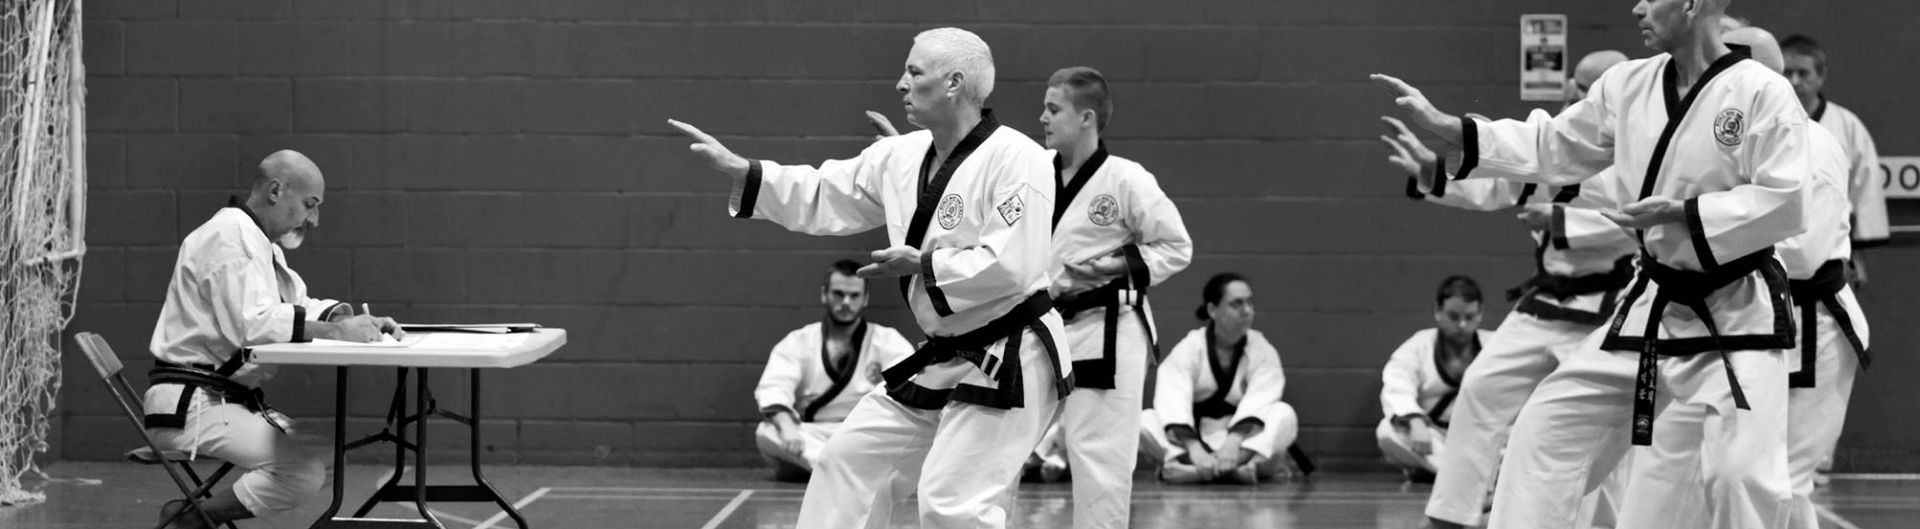 adult family karate classes